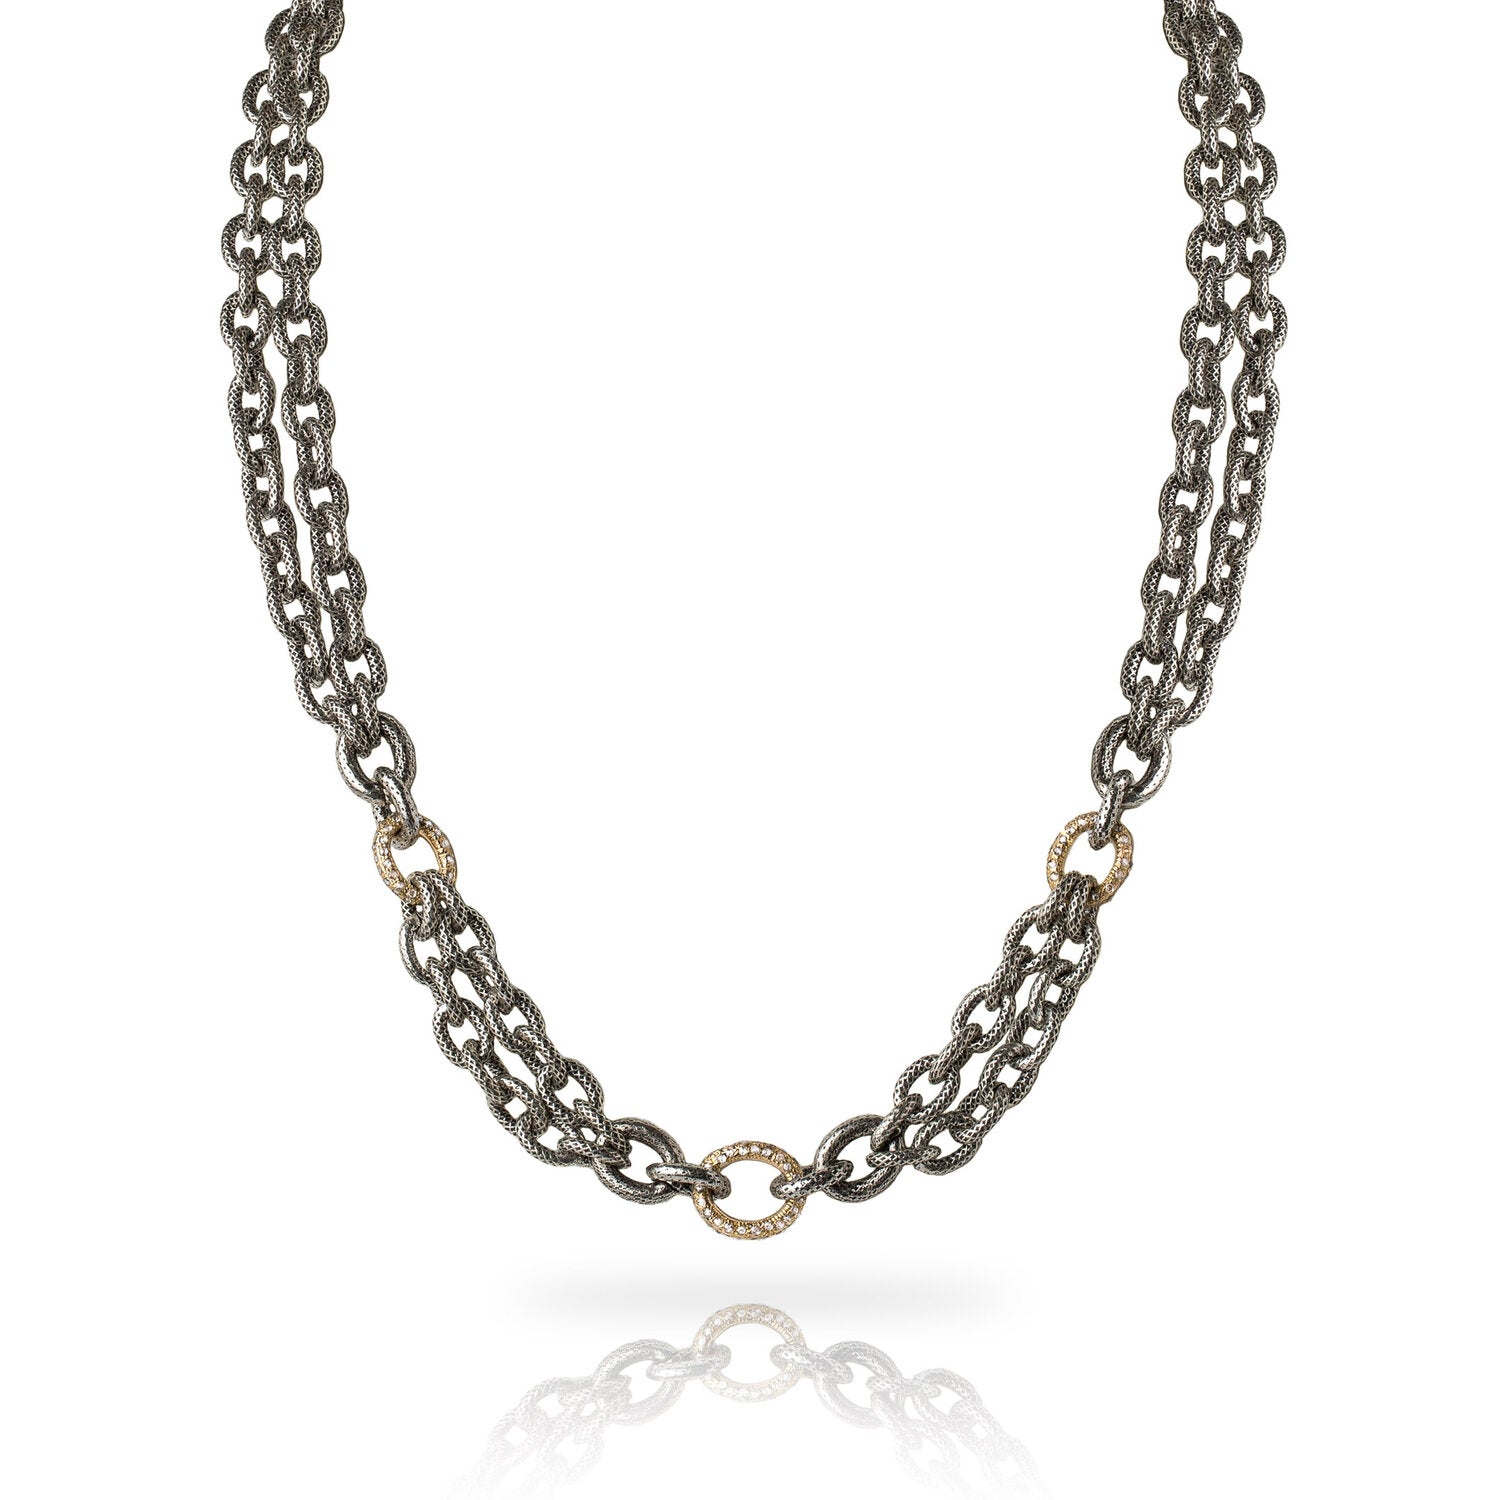 A trio of diamond pavé links are interspersed between a double-strand of our exclusive textured and oxidized chain in this casual and contemporary chain link necklace.  Diamond pavé link is available in 14k yellow gold, 14k rose gold, or sterling silver  Adjustable length between 16 to 18 inches  Includes a Liza Beth signature satin finish clasp and extender  Made in USA